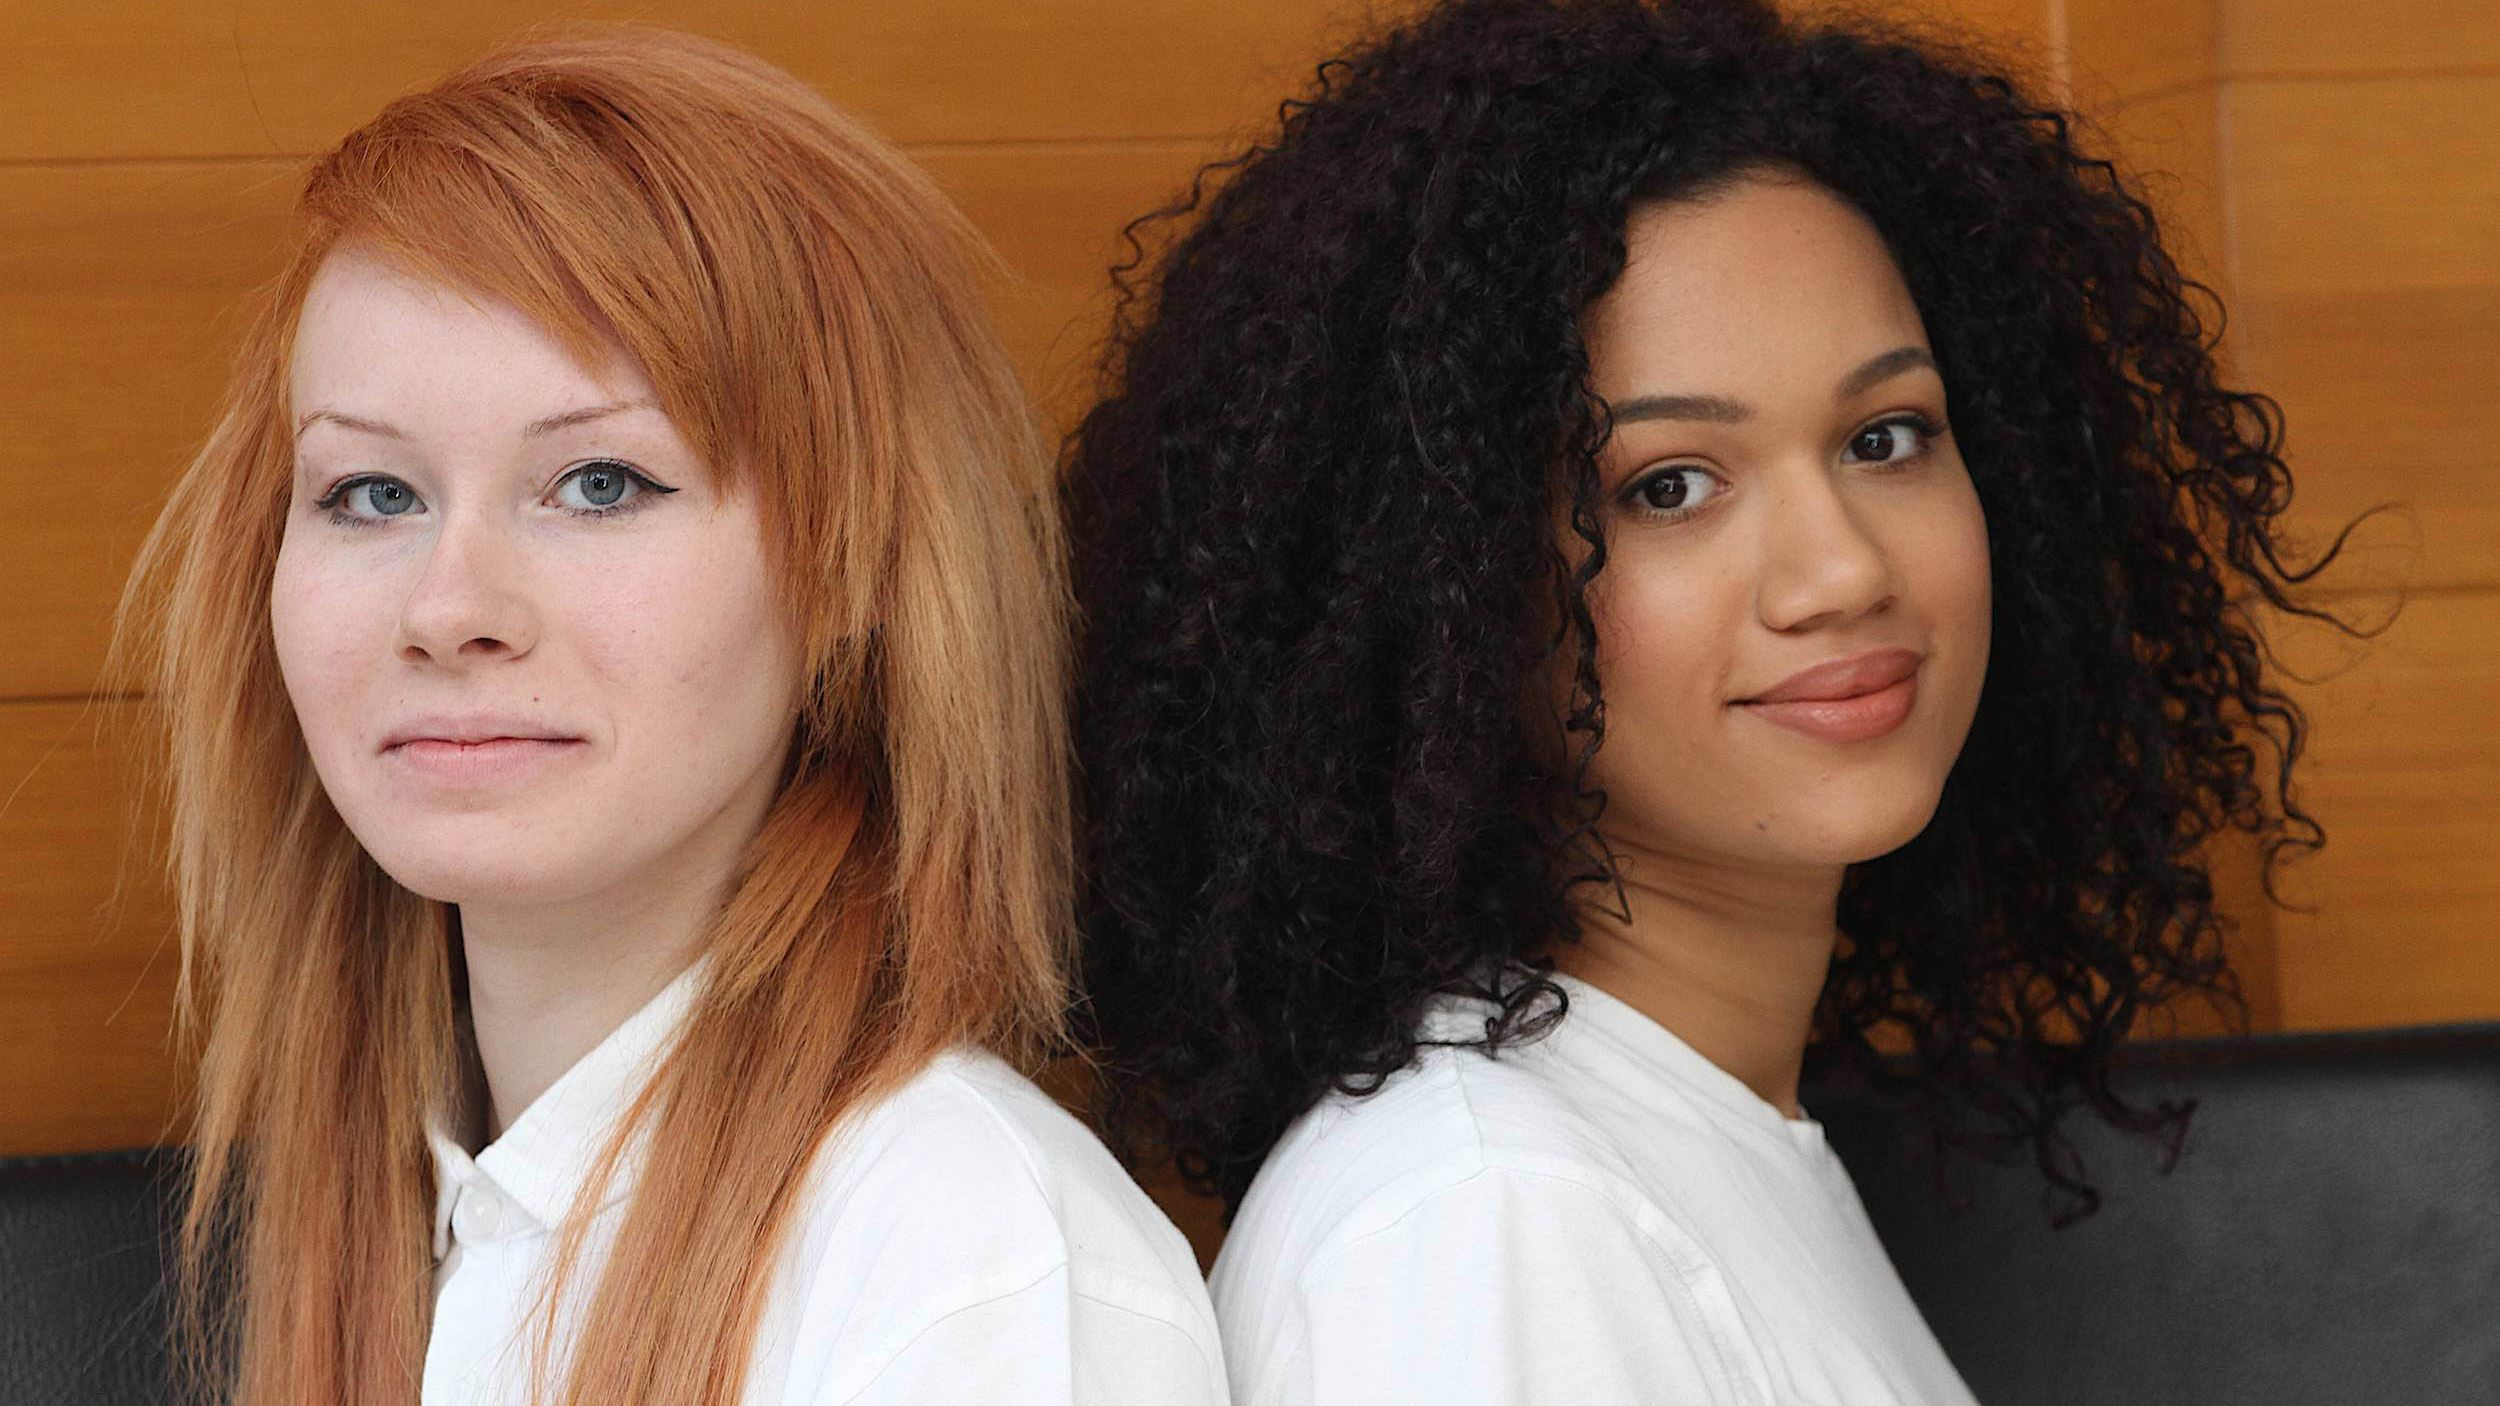 UK twins turn heads: one is white, the other black | CNN